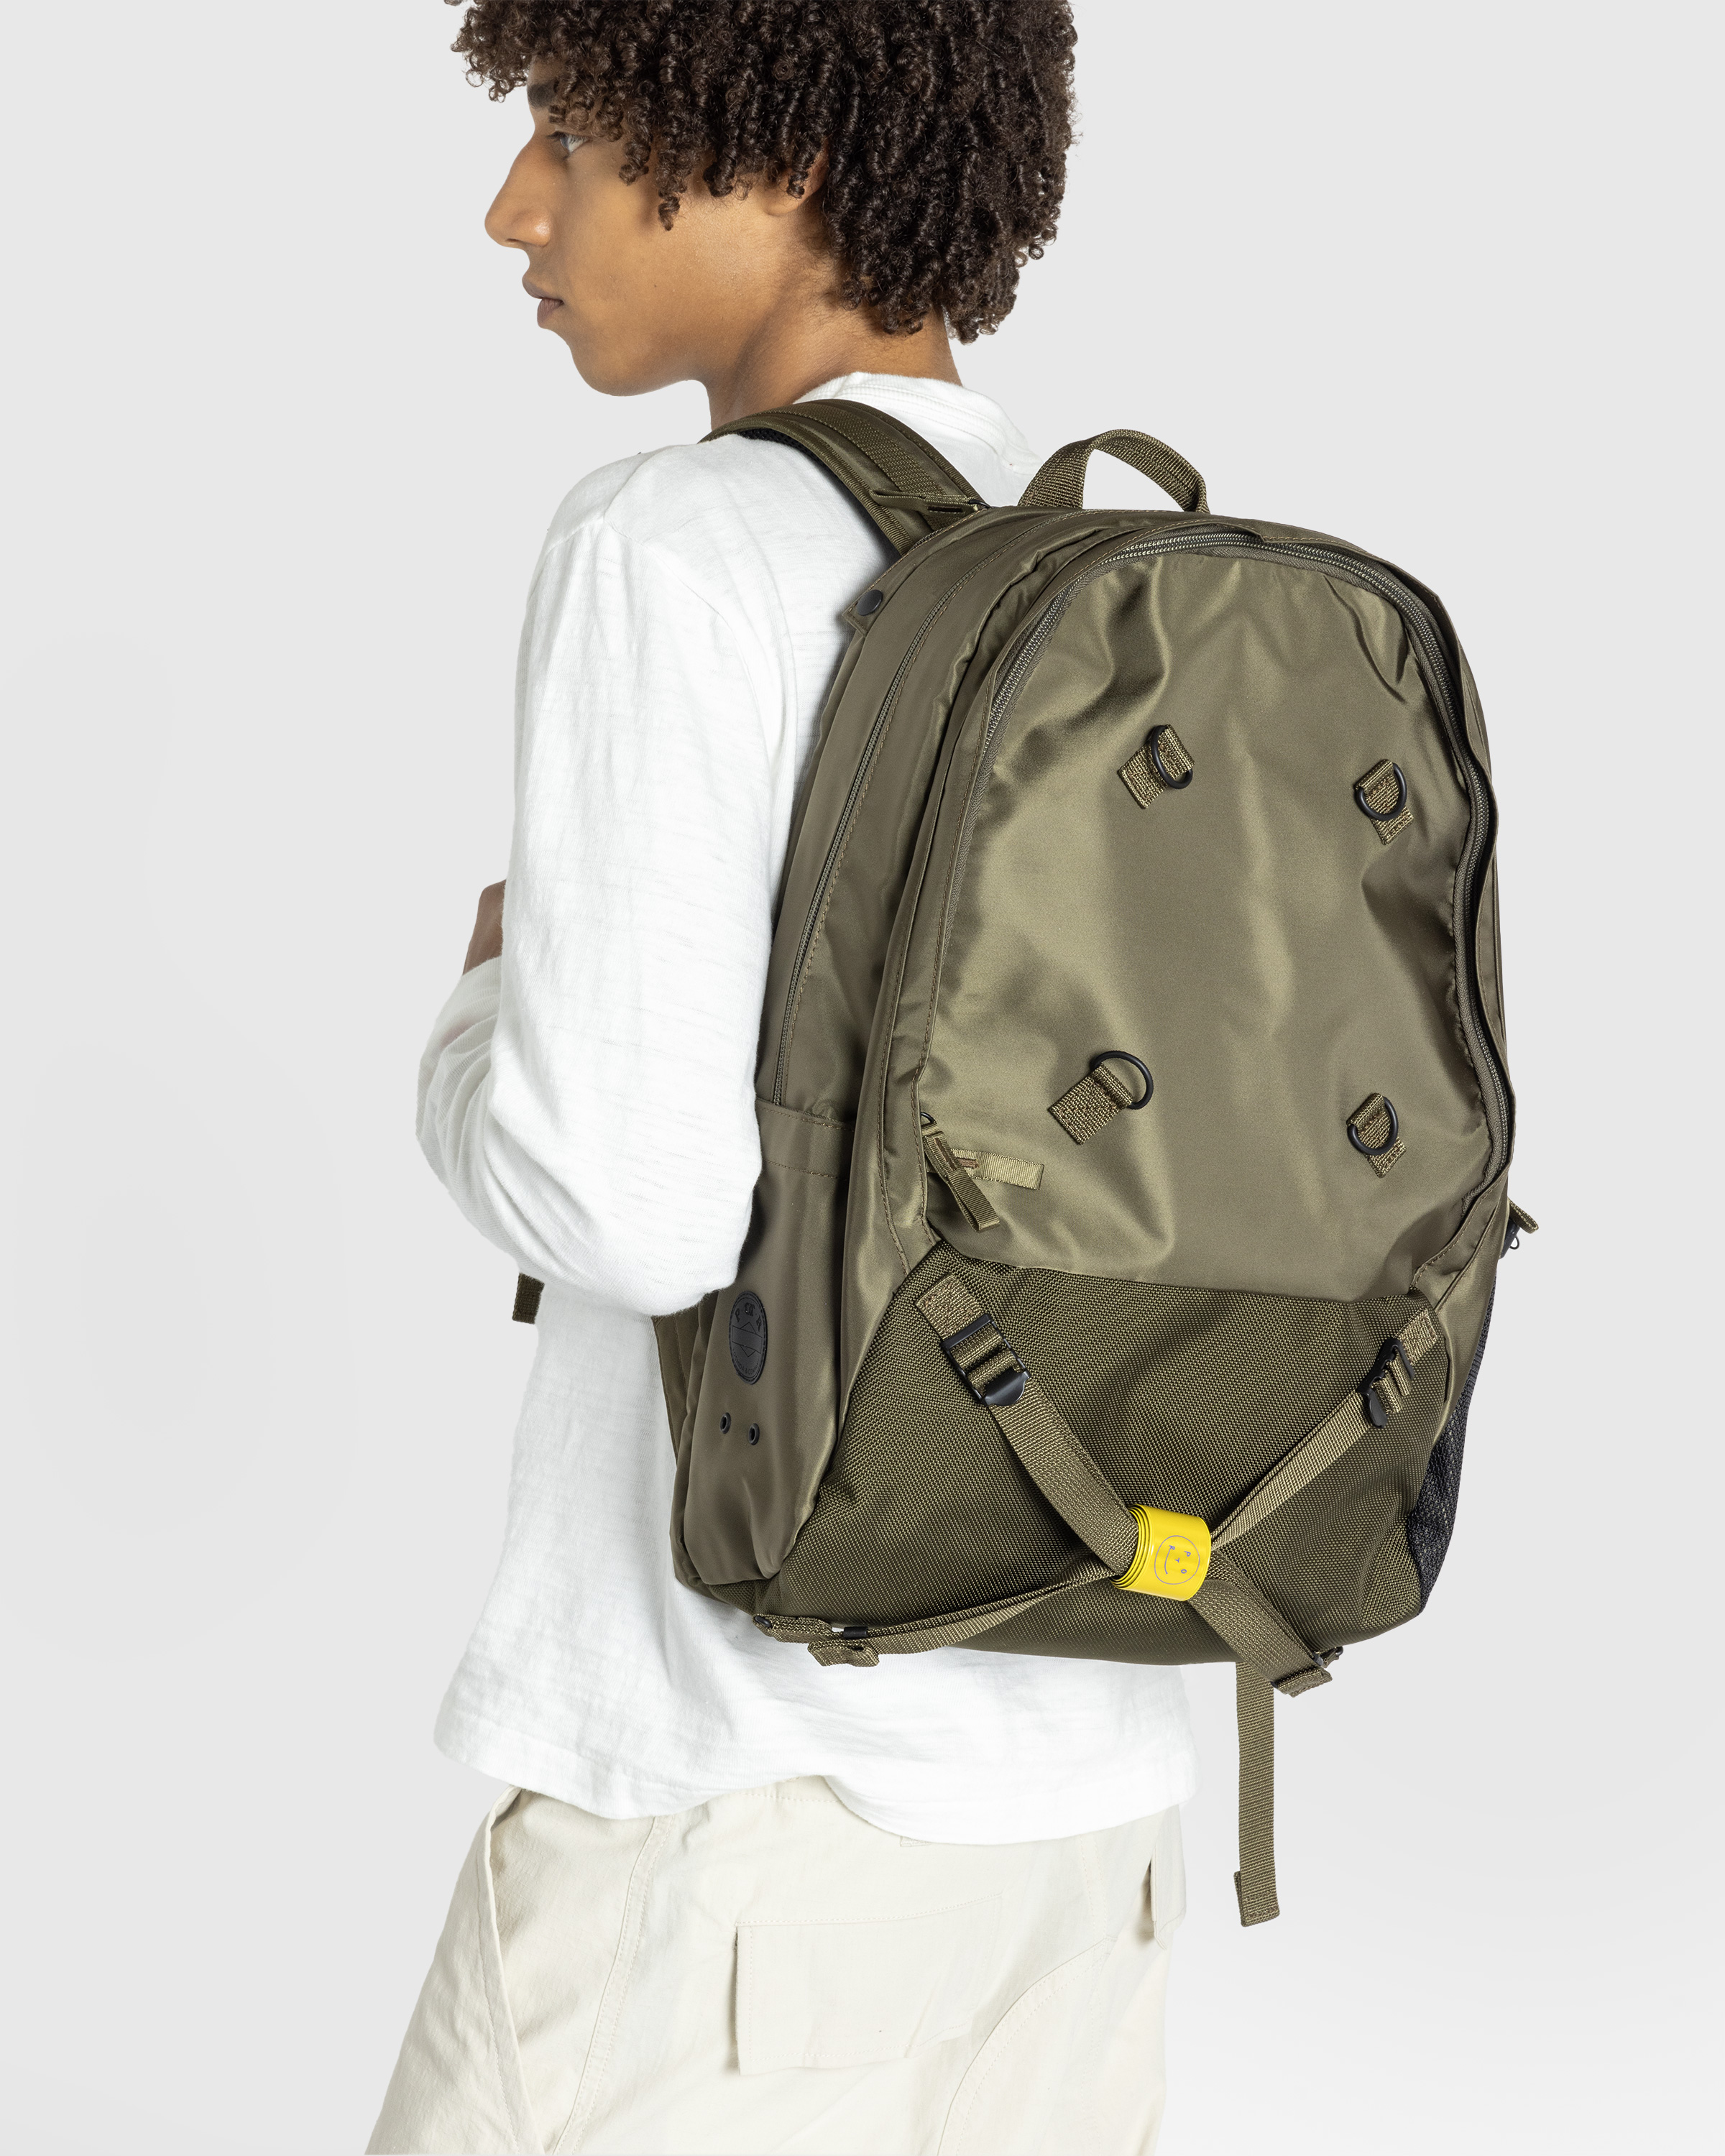 Porter-Yoshida & Co. – POTR Ride Daypack With Bicycle Chain Olive Green - Backpacks - Green - Image 4